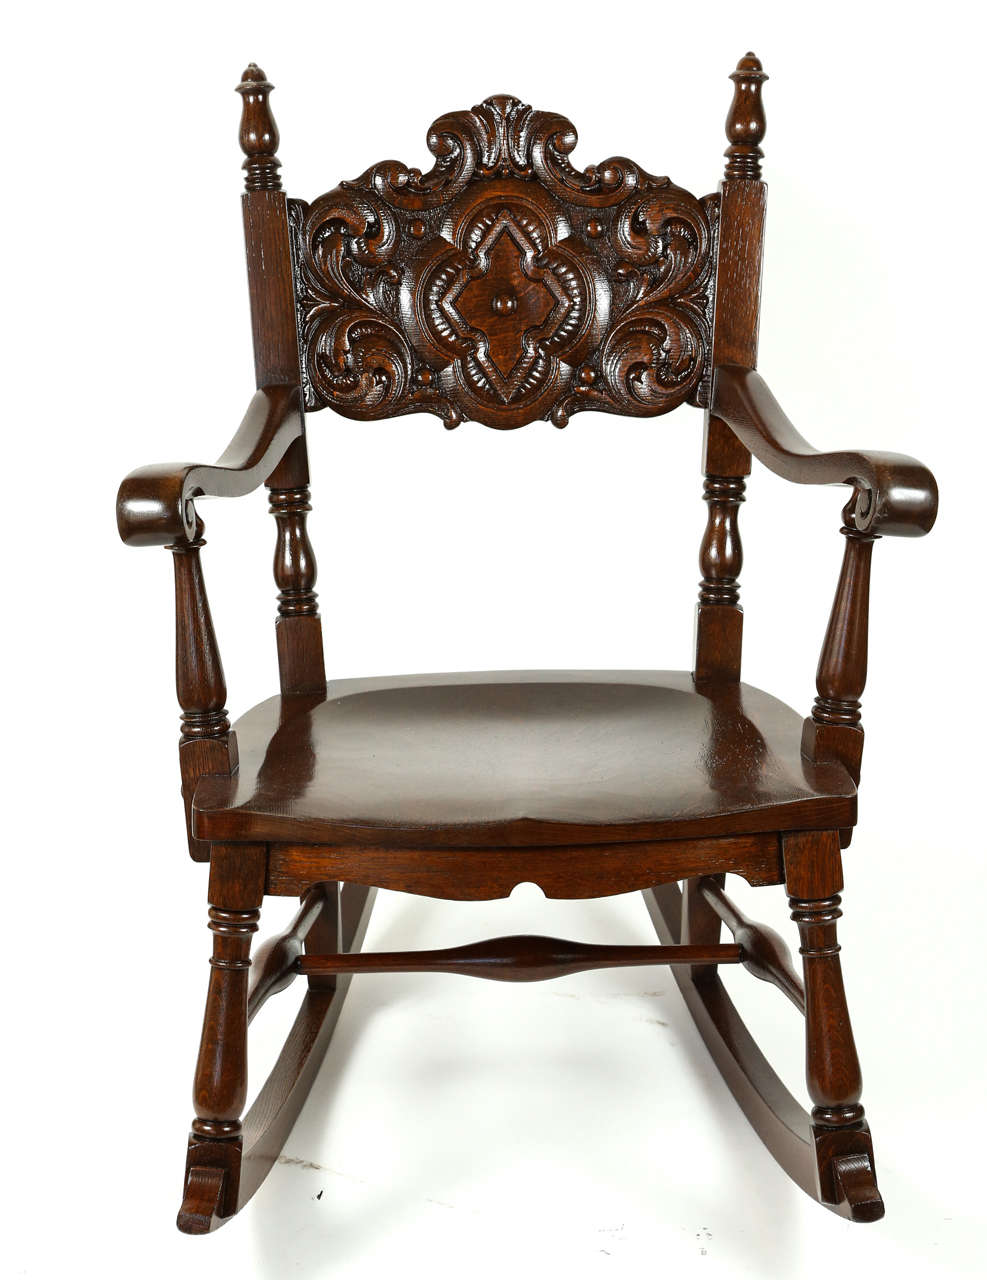 Oak rocking chair with carved wood seat back that has been newly refinished, circa 1930s.